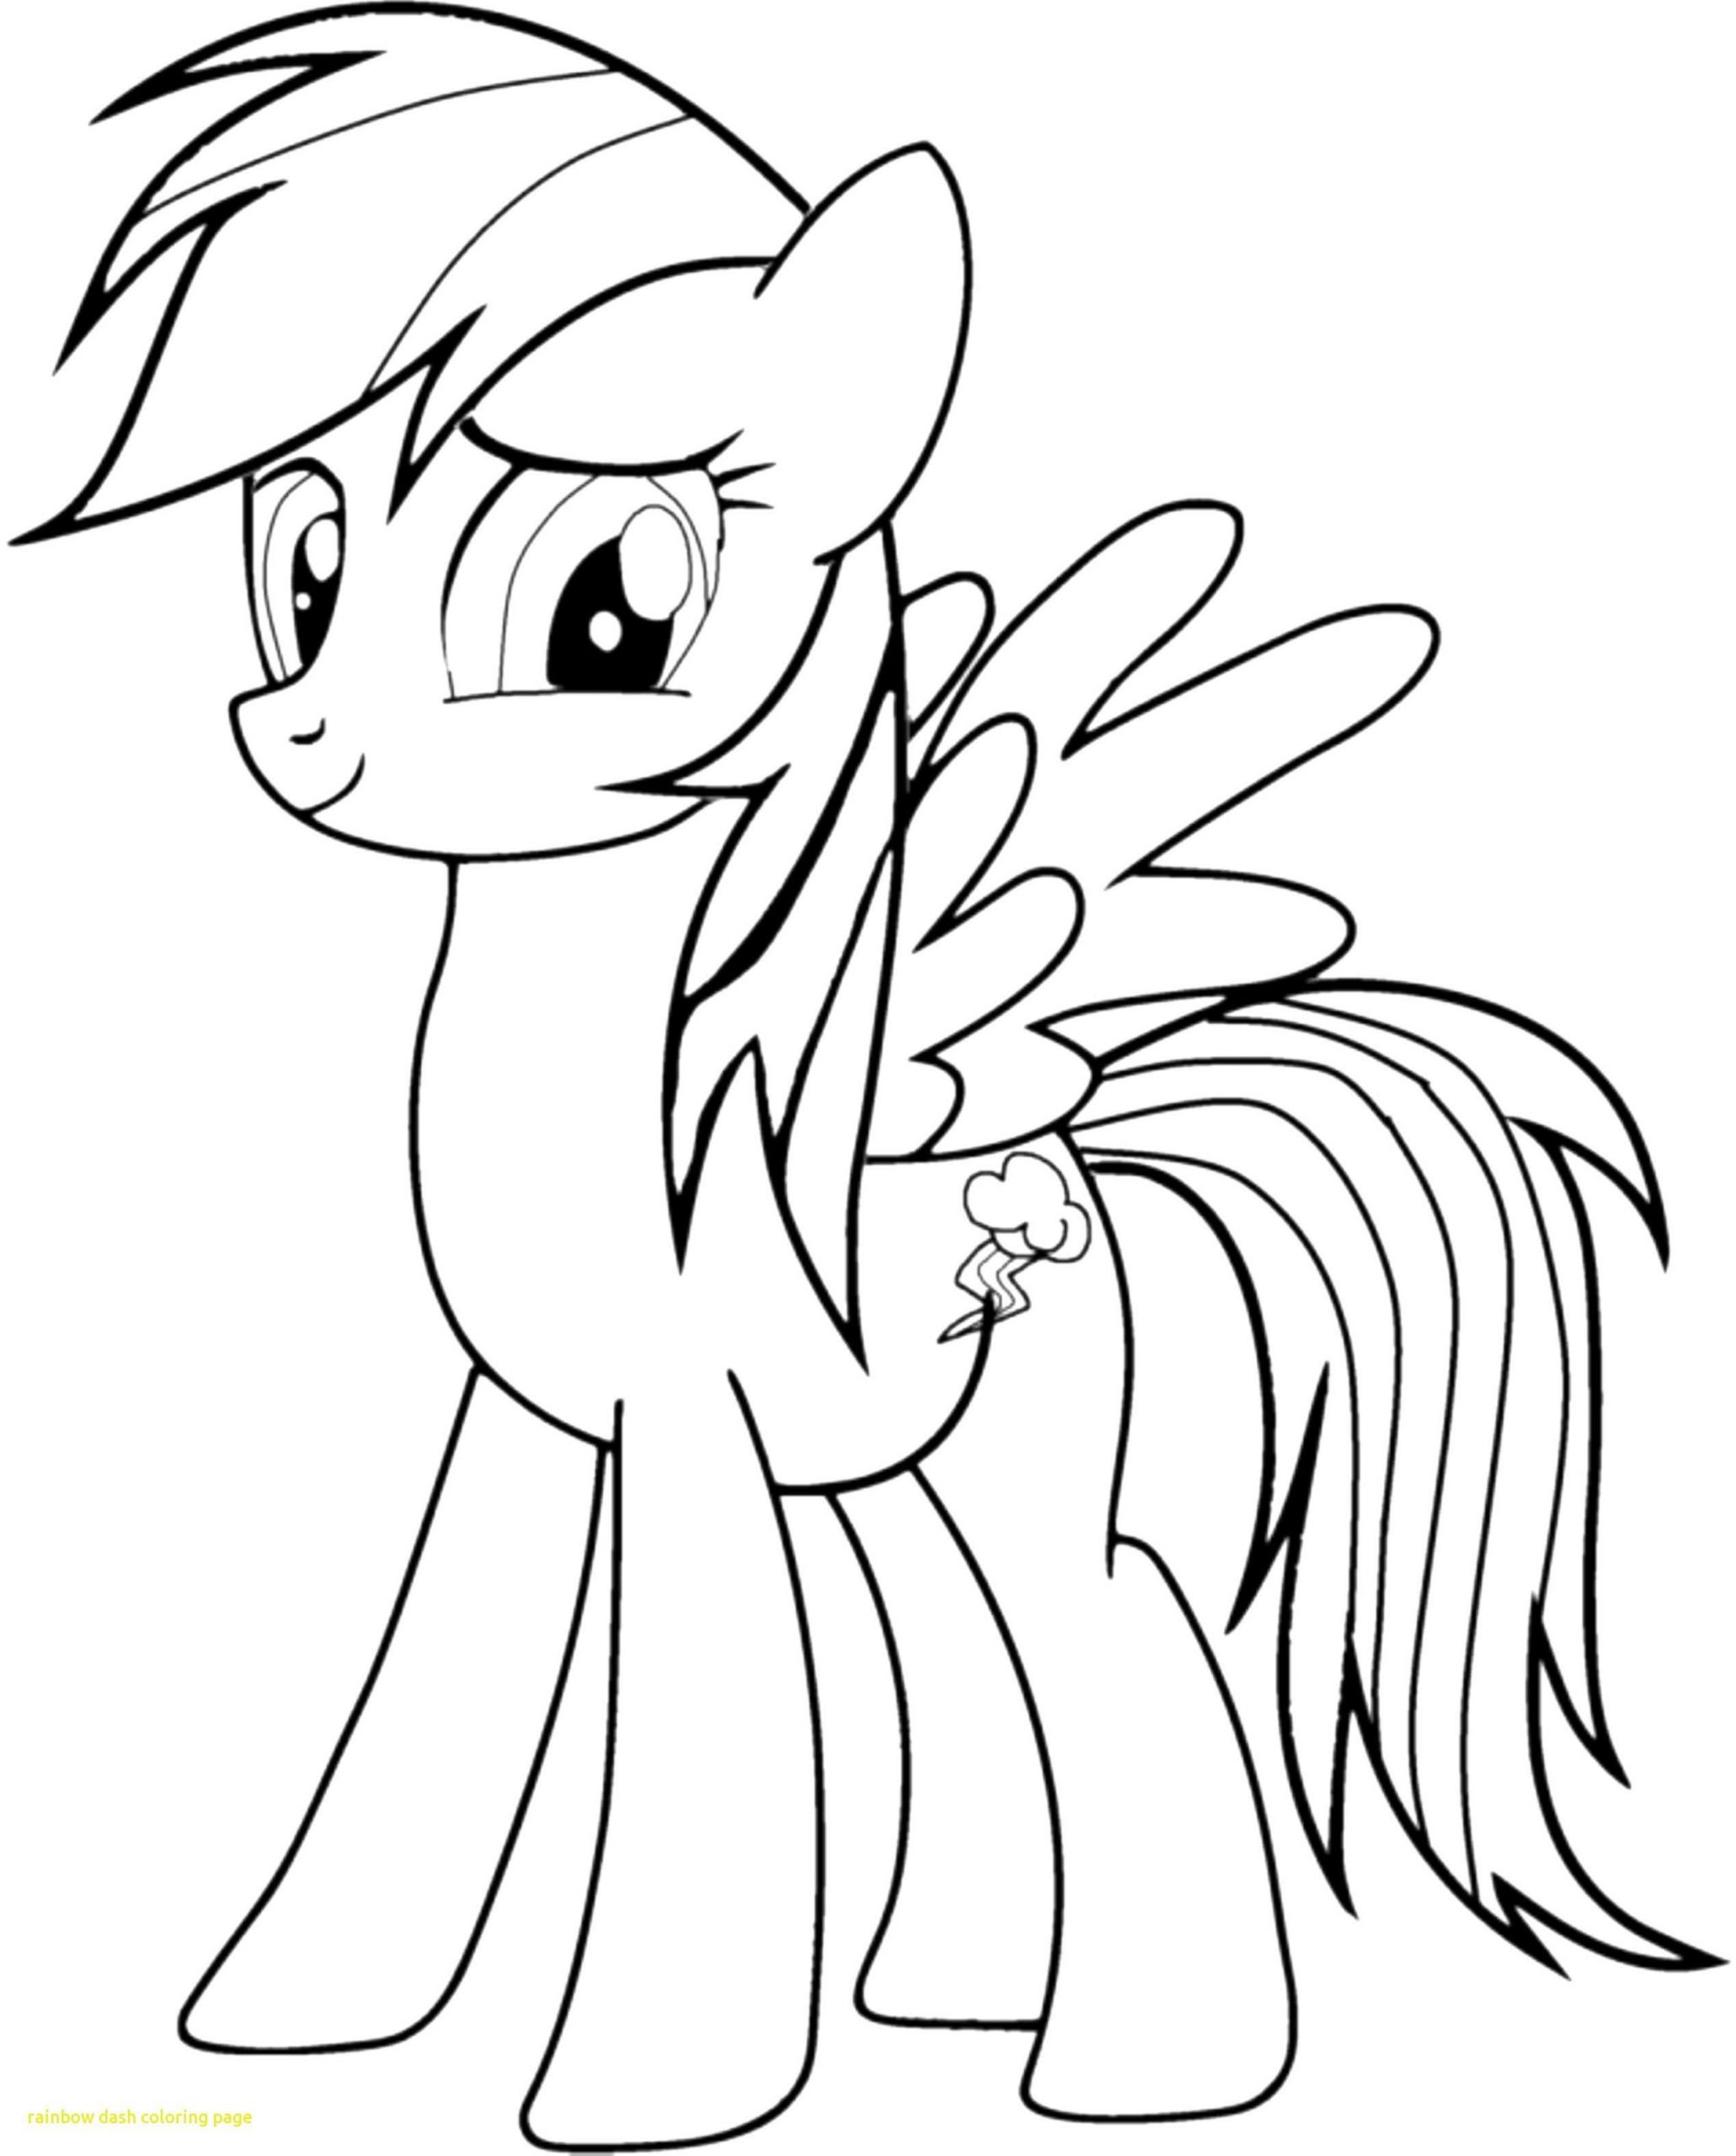 Coloring Sheets For Little Kids
 My Little Pony Coloring Pages Rainbow Dash – Through the